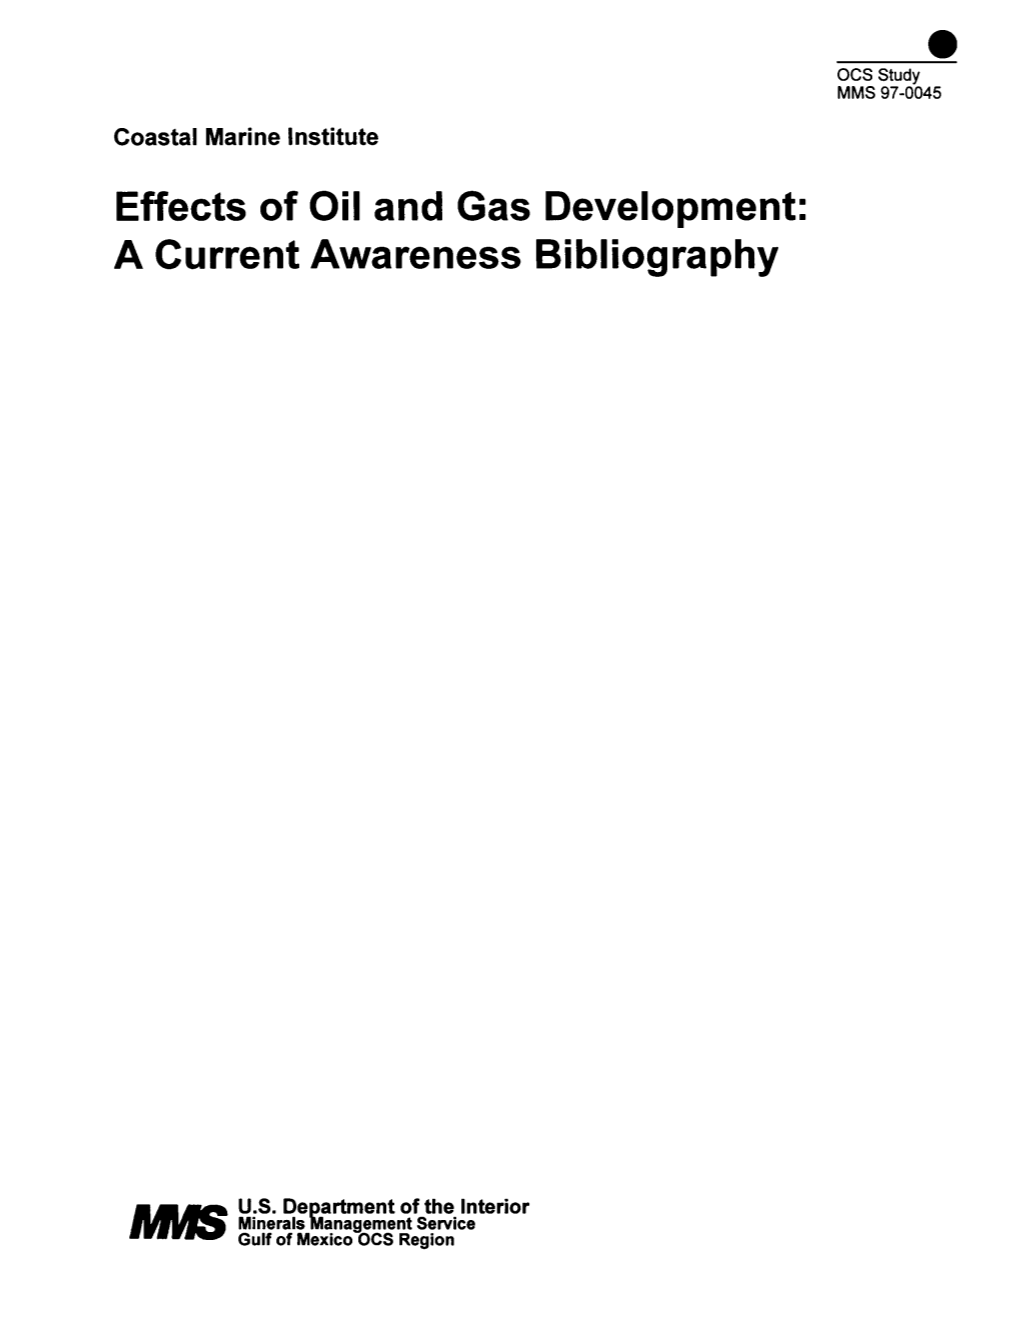 Effects of Oil and Gas Development: a Current Awareness Bibliography